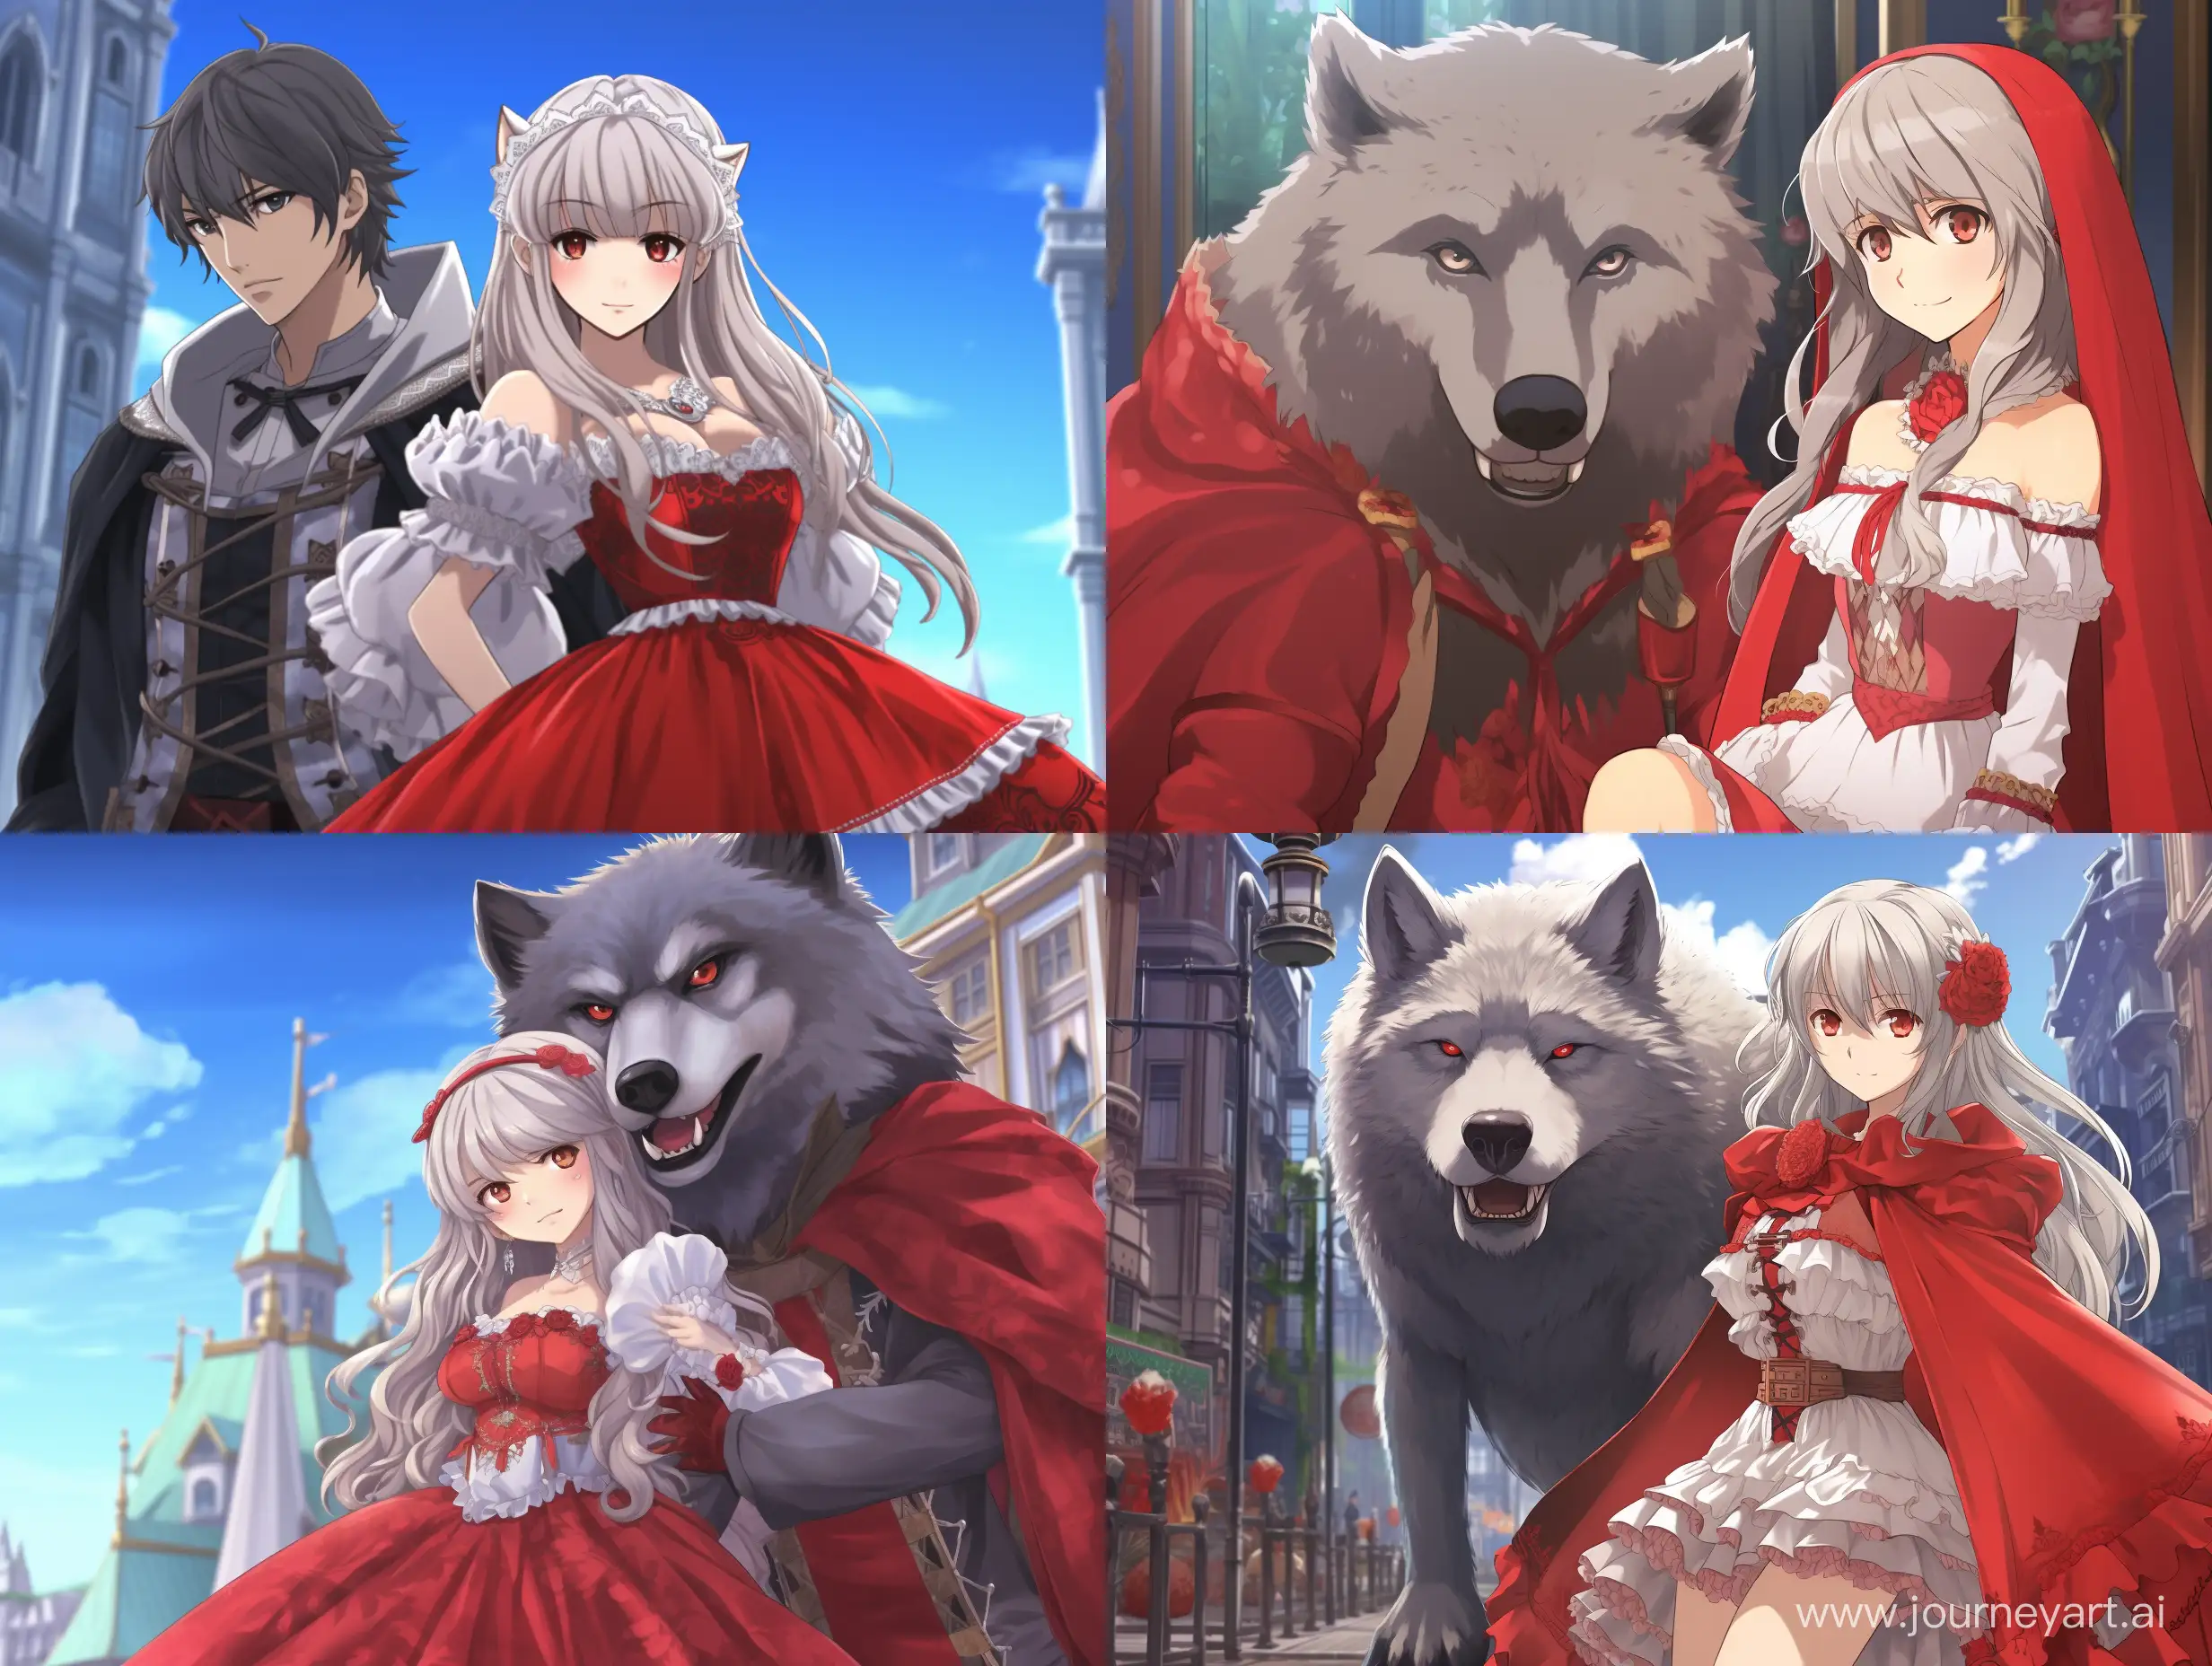 Furry-Gray-Wolf-Guardian-Safeguards-NecoGirl-Red-Riding-Hood-in-Elegant-Ball-Gown